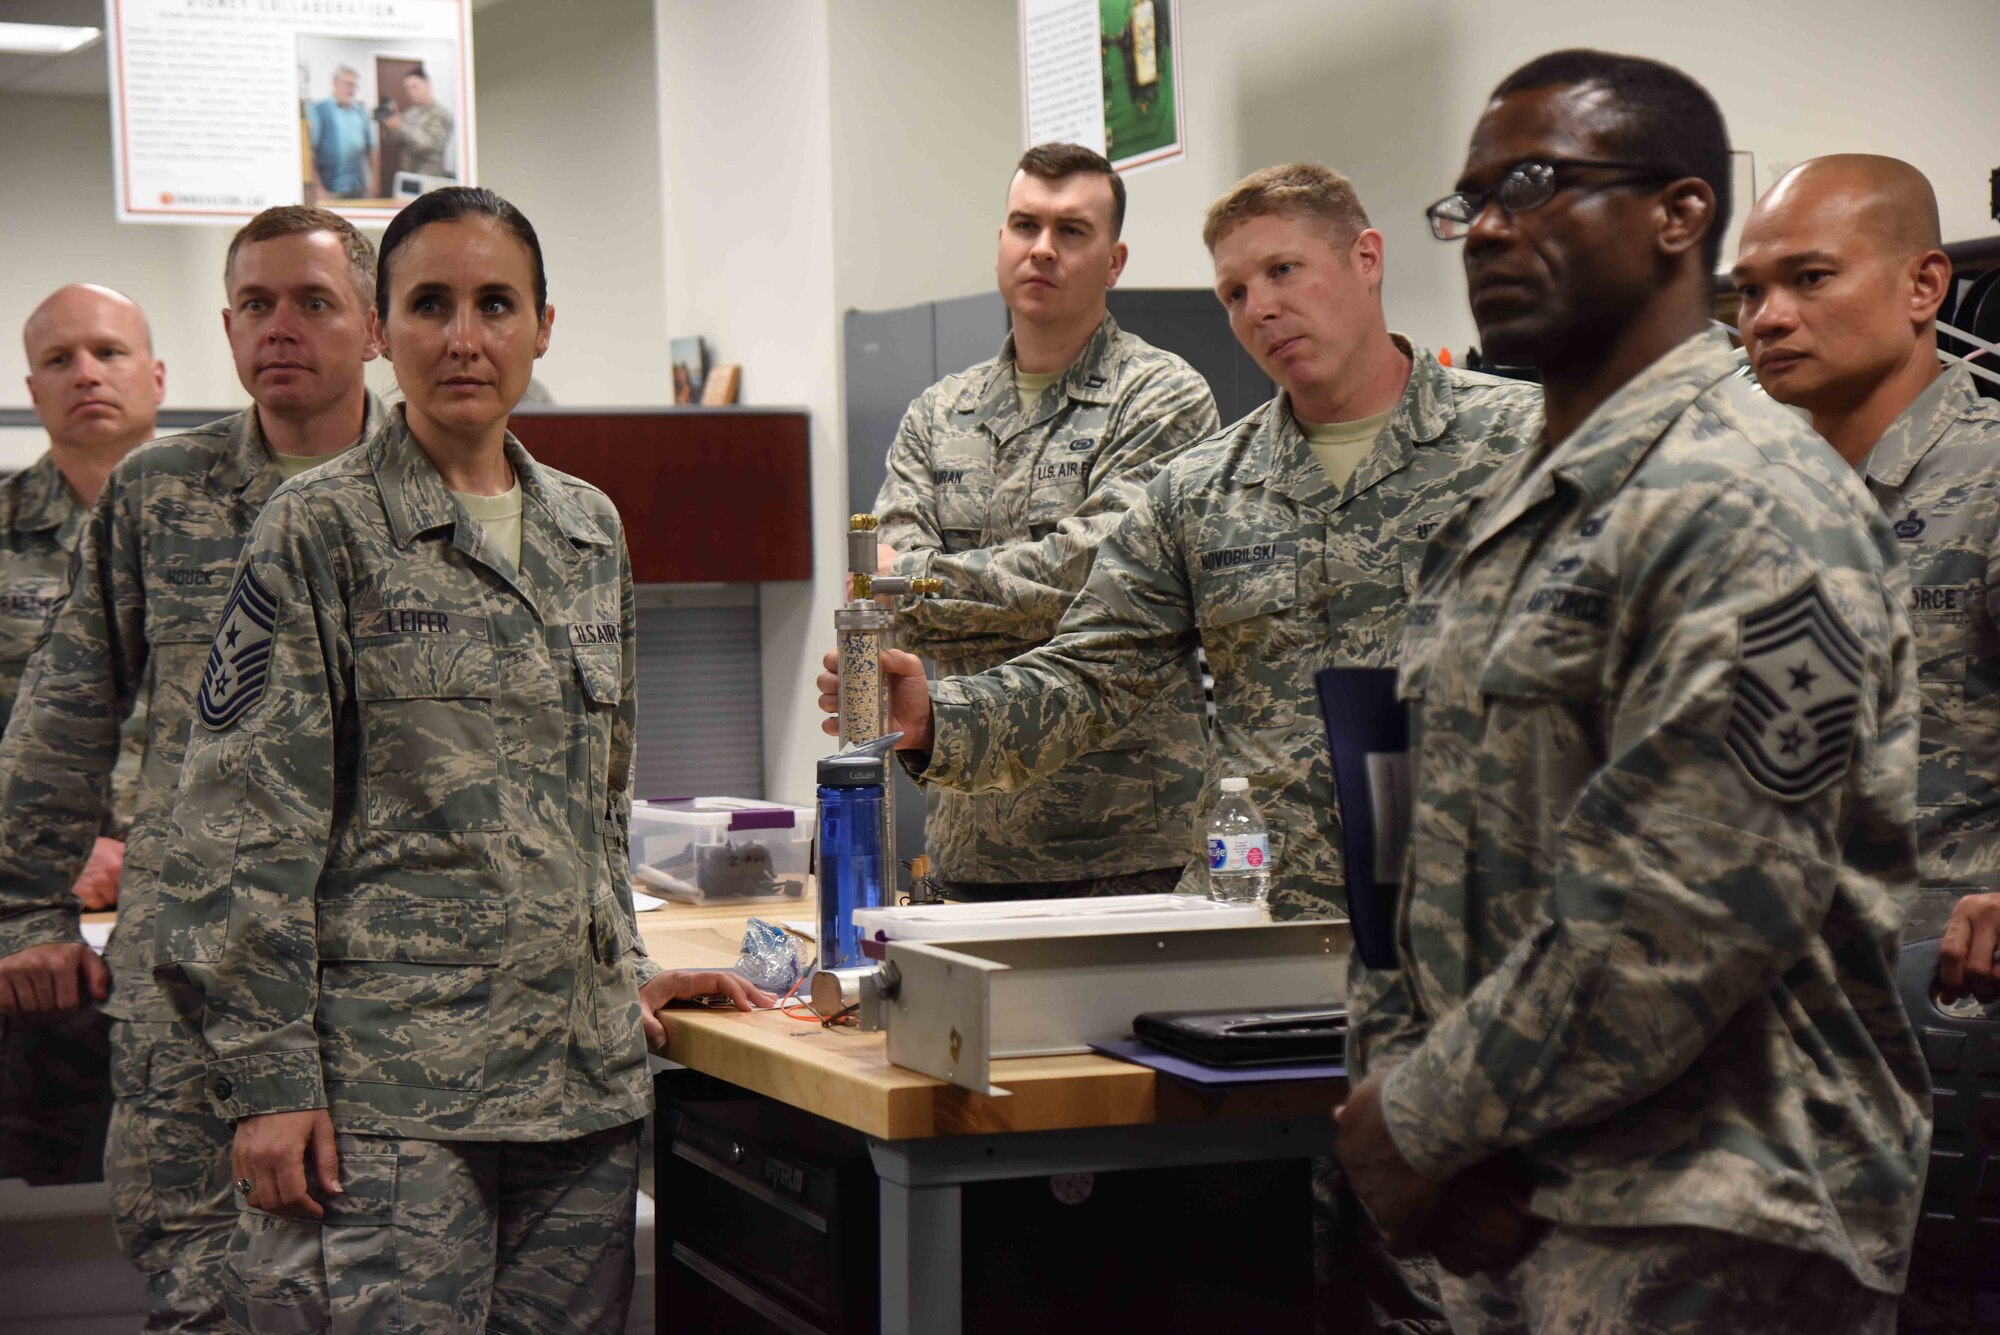 Leaders from across 25th Air Force's Intelligence, Surveillance and Reconnaissance community listen as members of the Air Force Technical Applications Center brief them on how the center uses innovation to develop and streamline technologies and processes at a cheaper cost while simultaneously addressing mission gaps.  Thirty-five ISR Airmen visited the nuclear treaty monitoring center June 1, 2018.  (U.S. Air Force photo by Susan A. Romano)